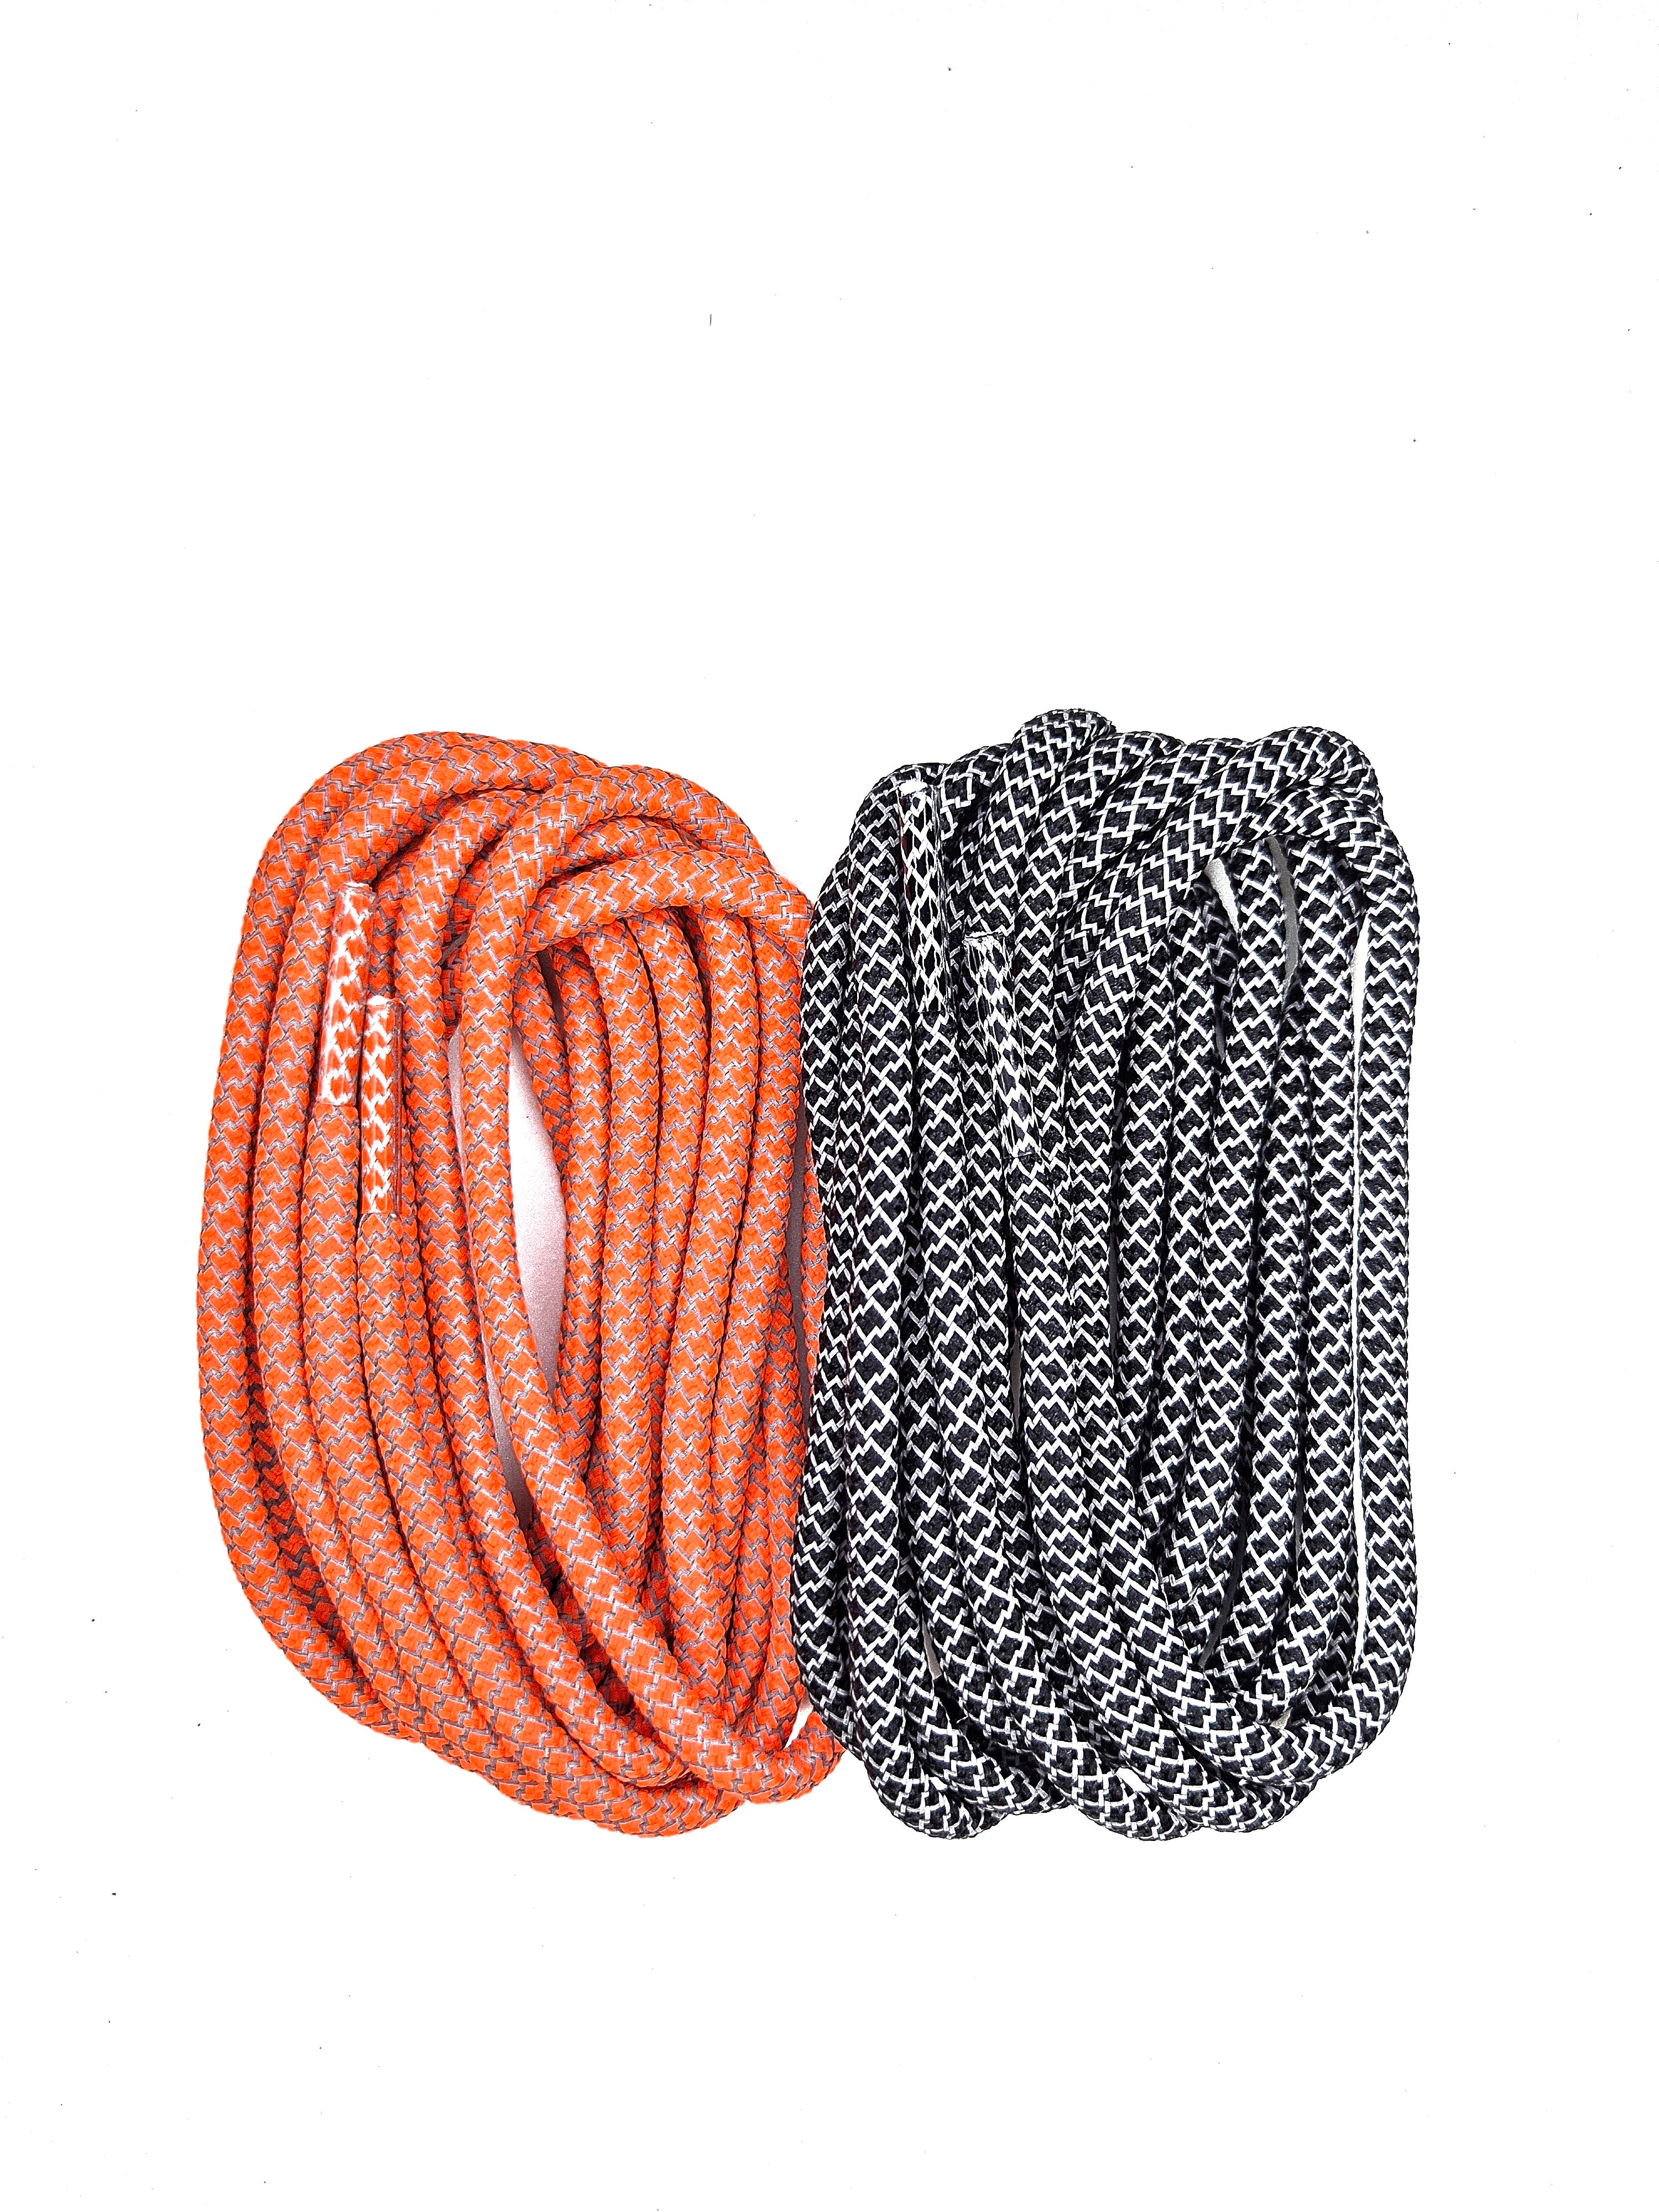 Yeezy 350 Style Rope Reflective laces 2 pair combo by TGLC